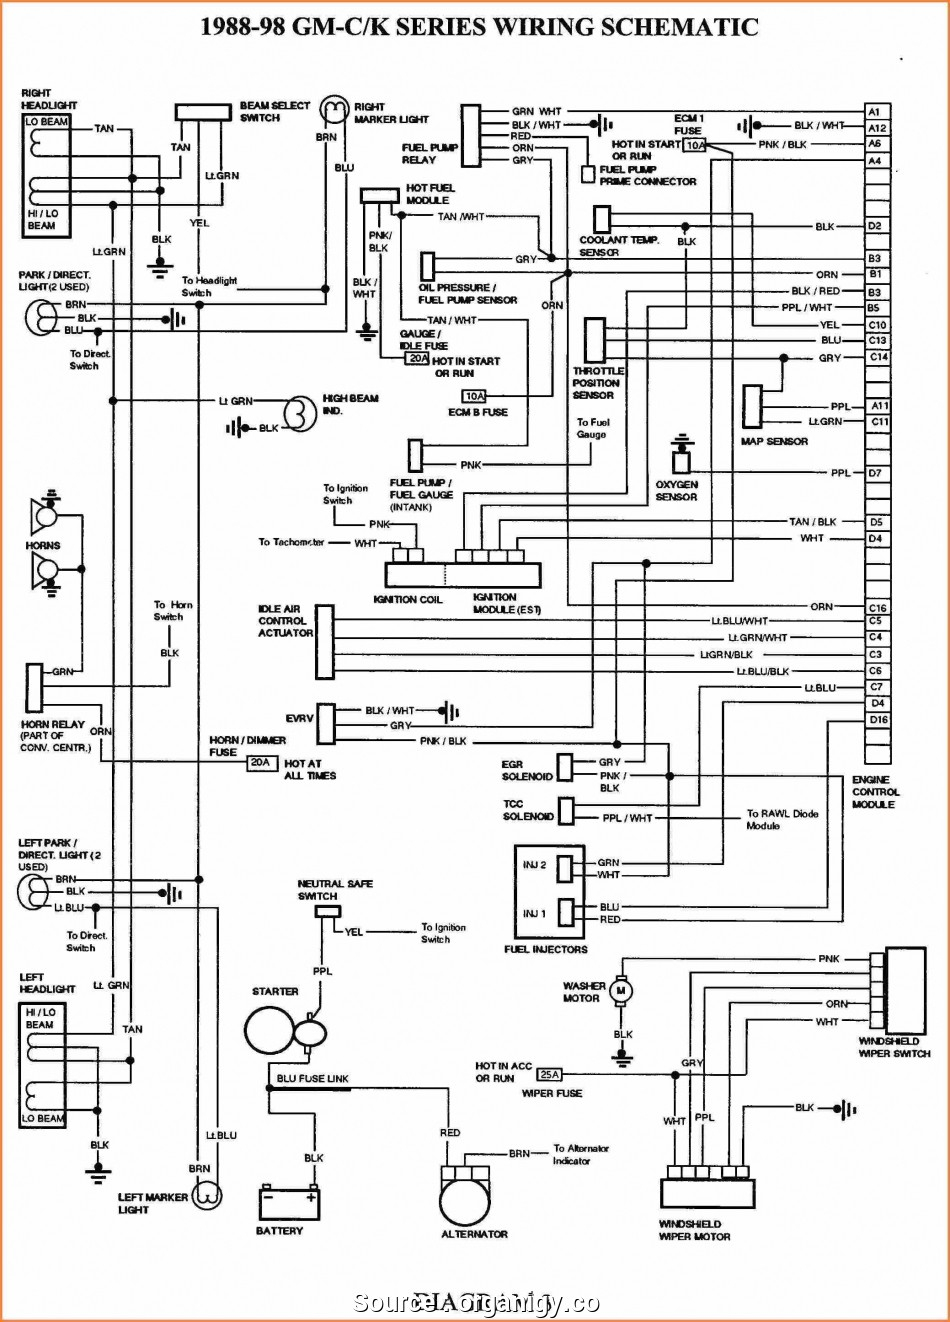 86 Chevy Starter Wiring Diagram Perfect Tbi Wiring Diagram 1989 - Starter Solenoid Wiring Diagram Chevy